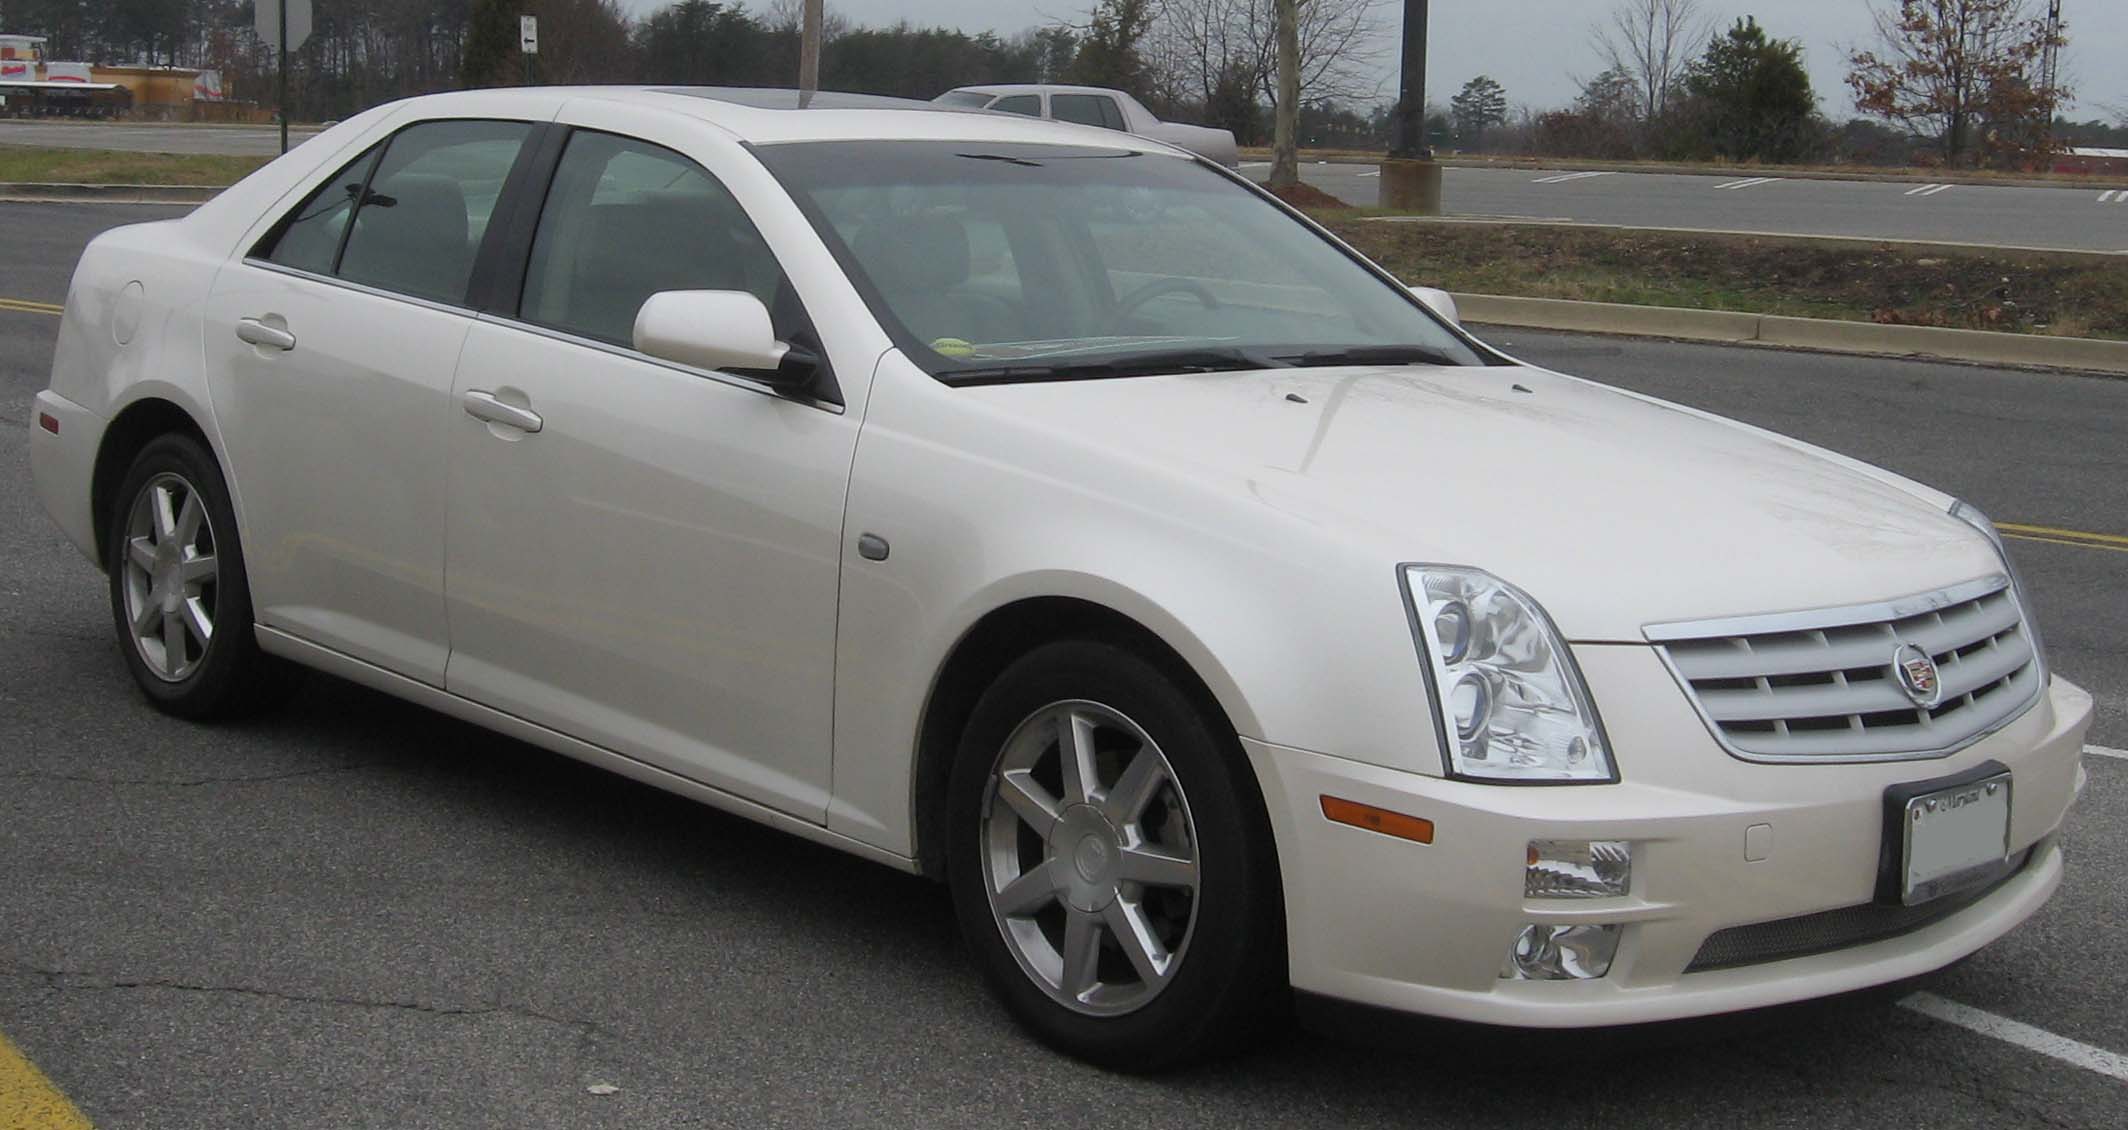 File:2005-2007 Cadillac STS.jpg - Wikimedia Commons